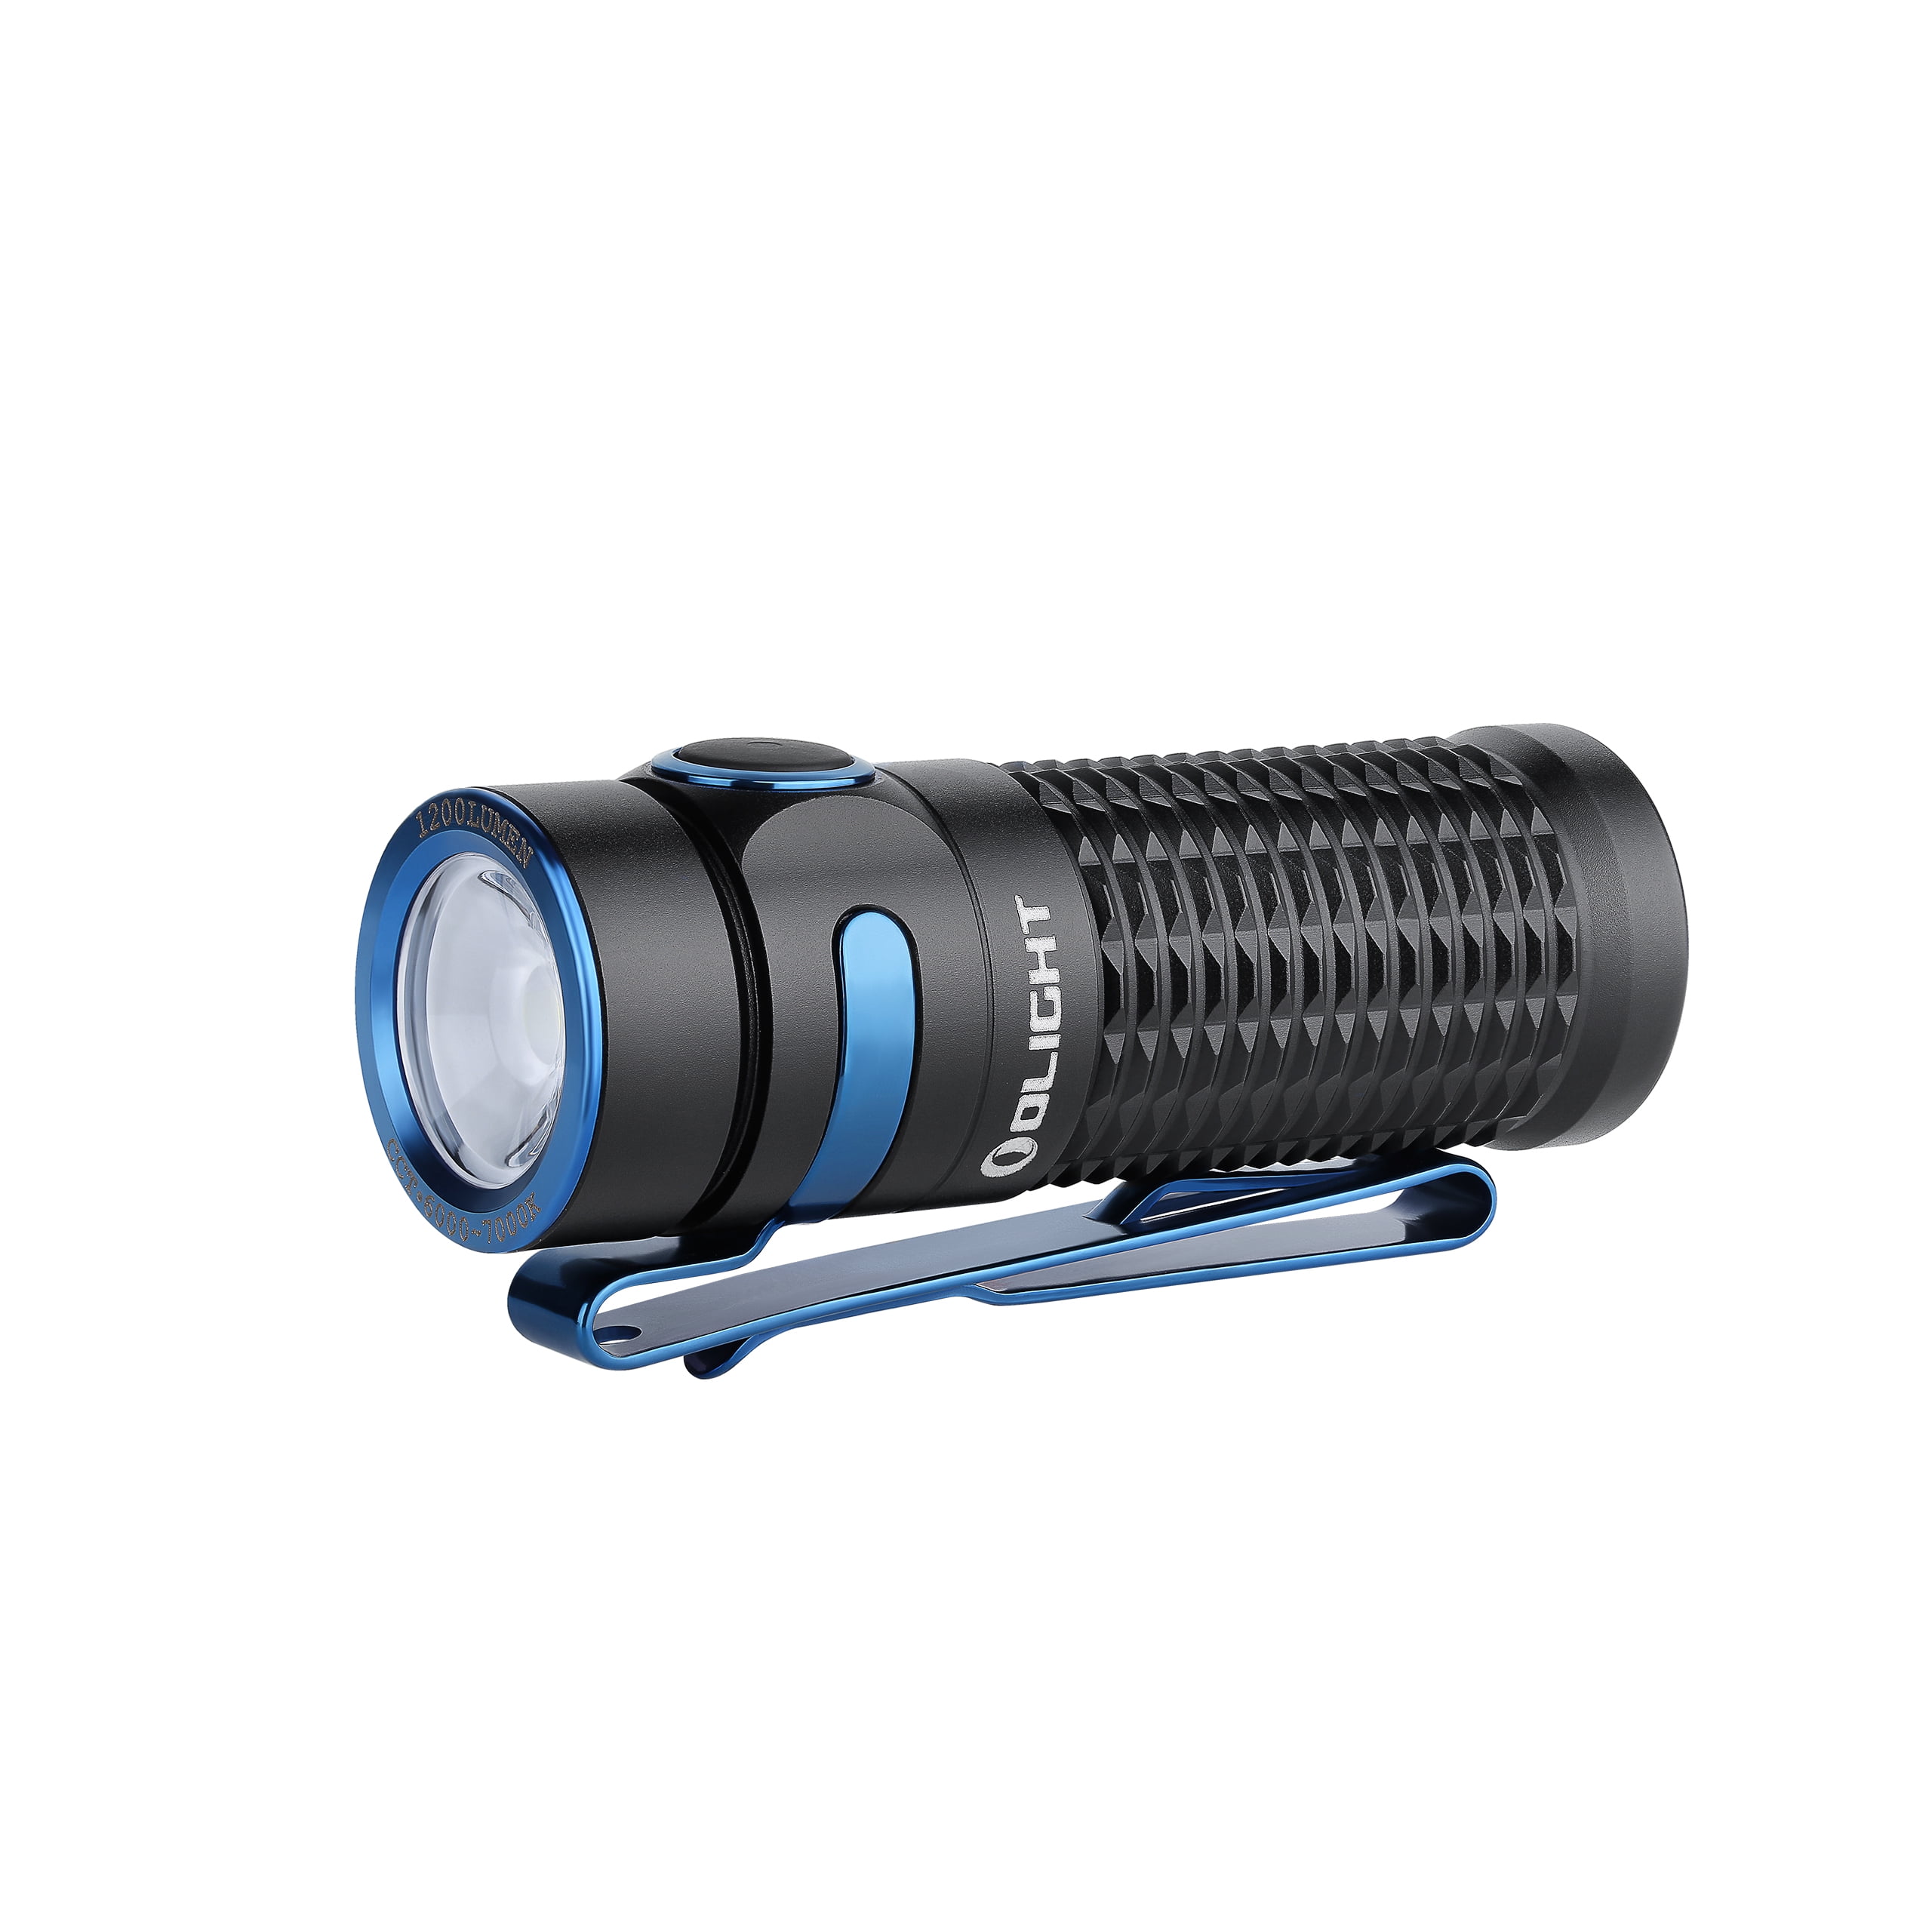 Olight S1R Baton II Blue Limited Edition Compact EDC Torch 